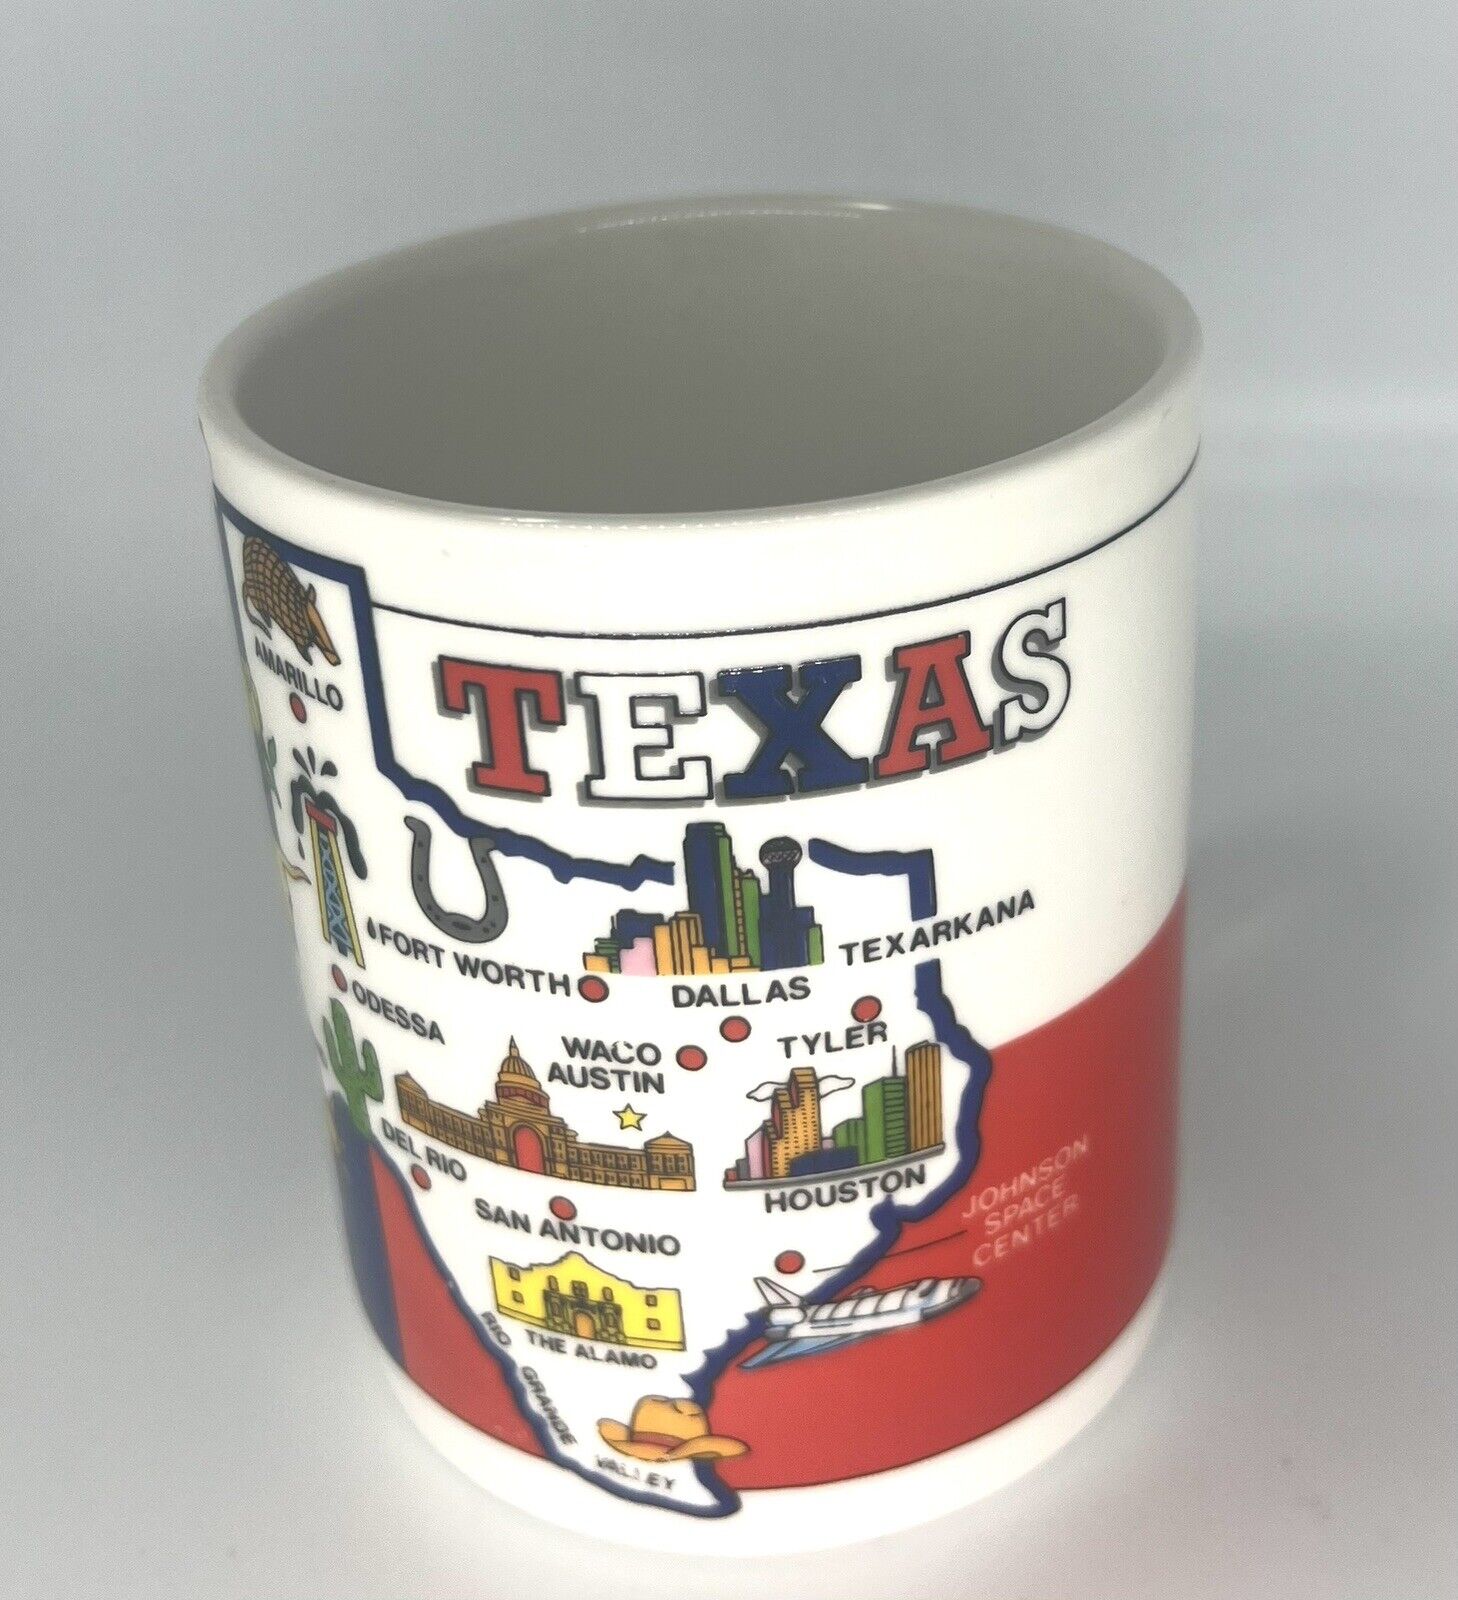 Texas The Lone Star State Blue Red White  Mug Cup with Map of Texas Major Cities